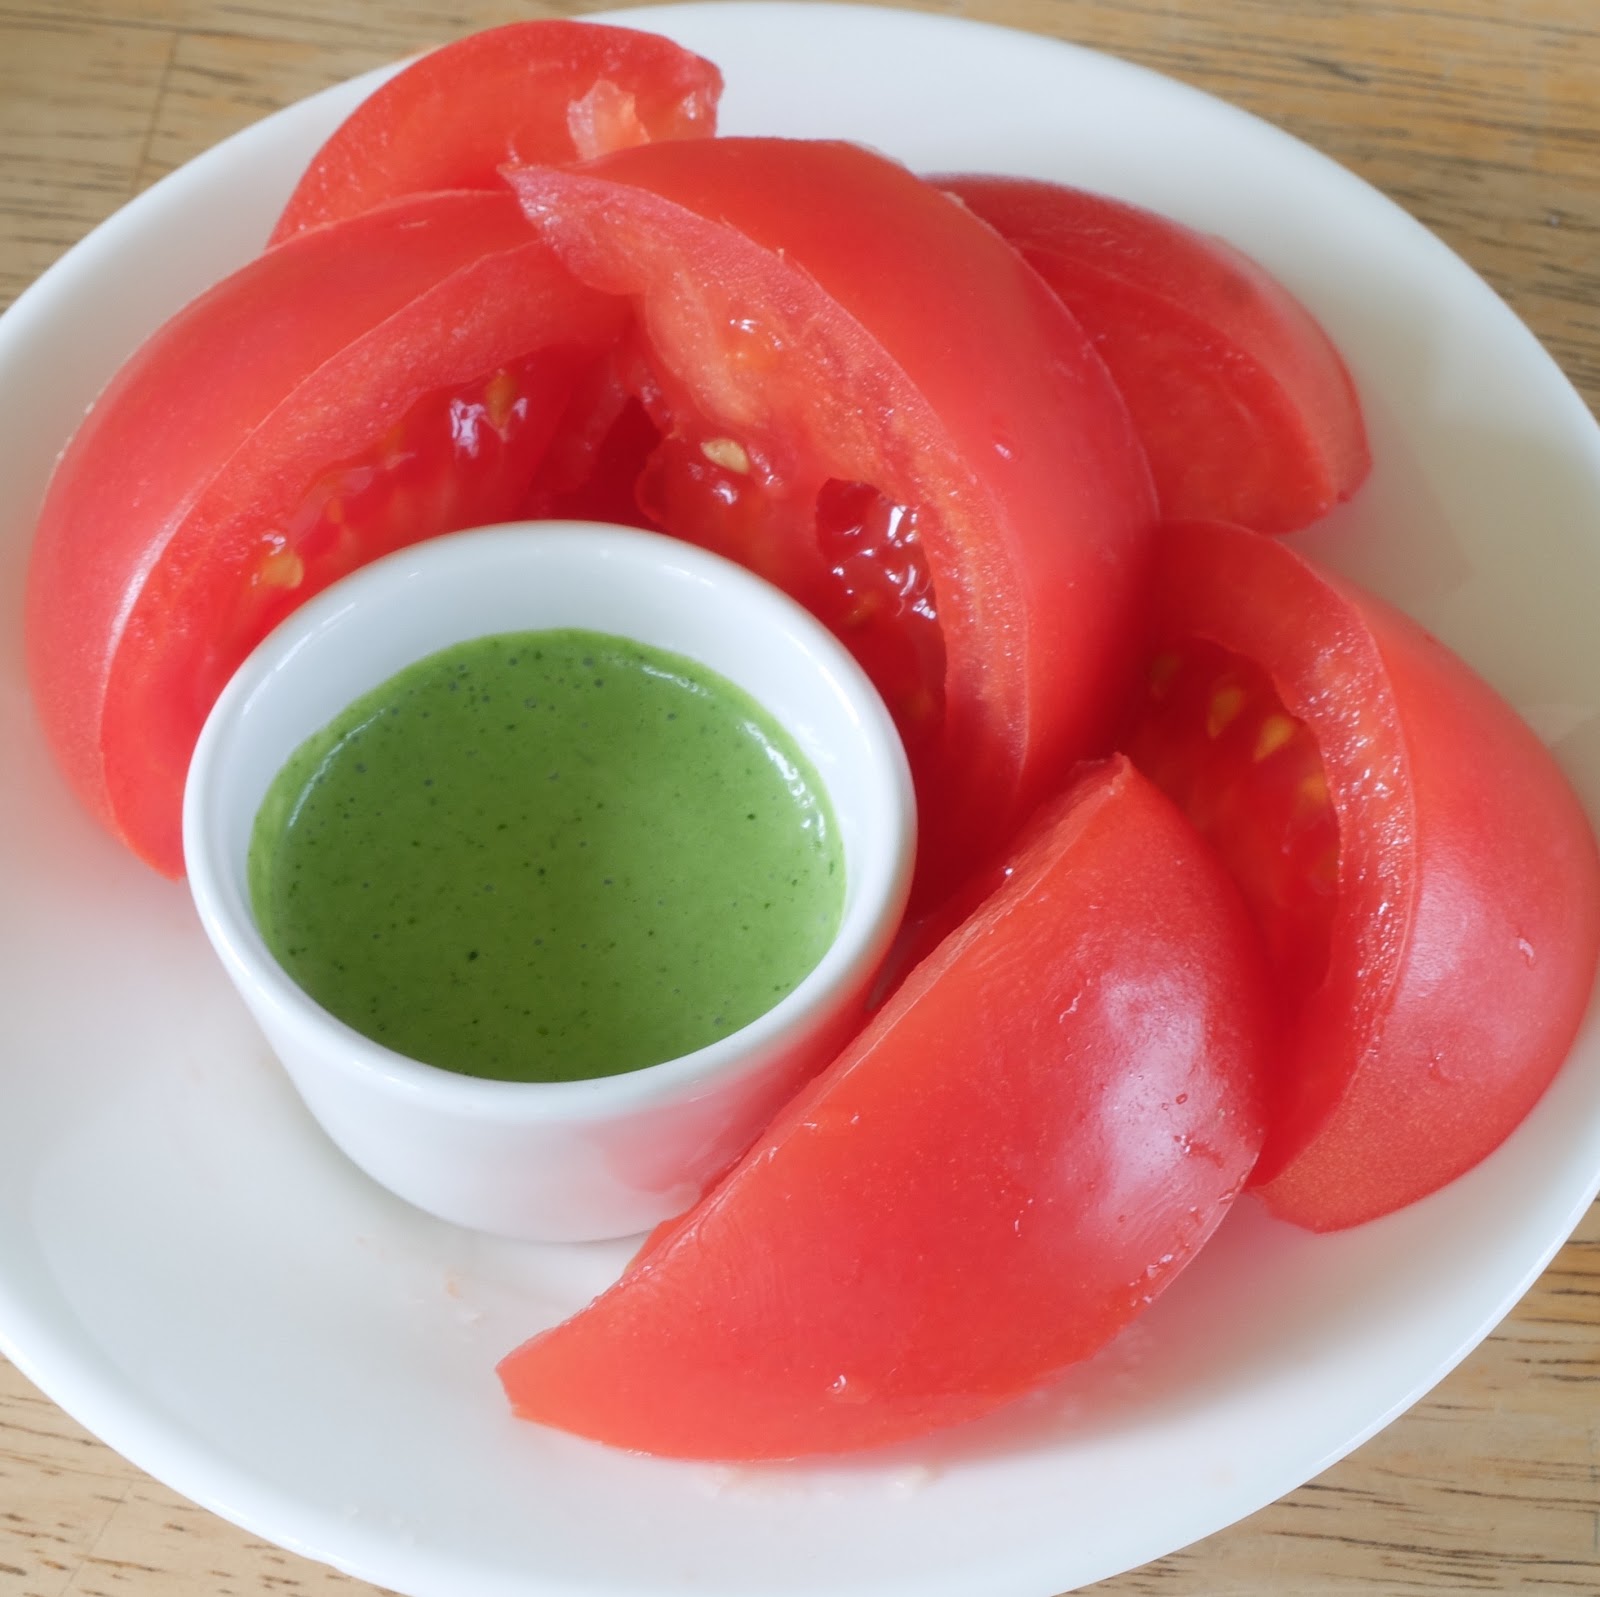 Use some Green Goddess dressing as a dip for ripe tomatoes